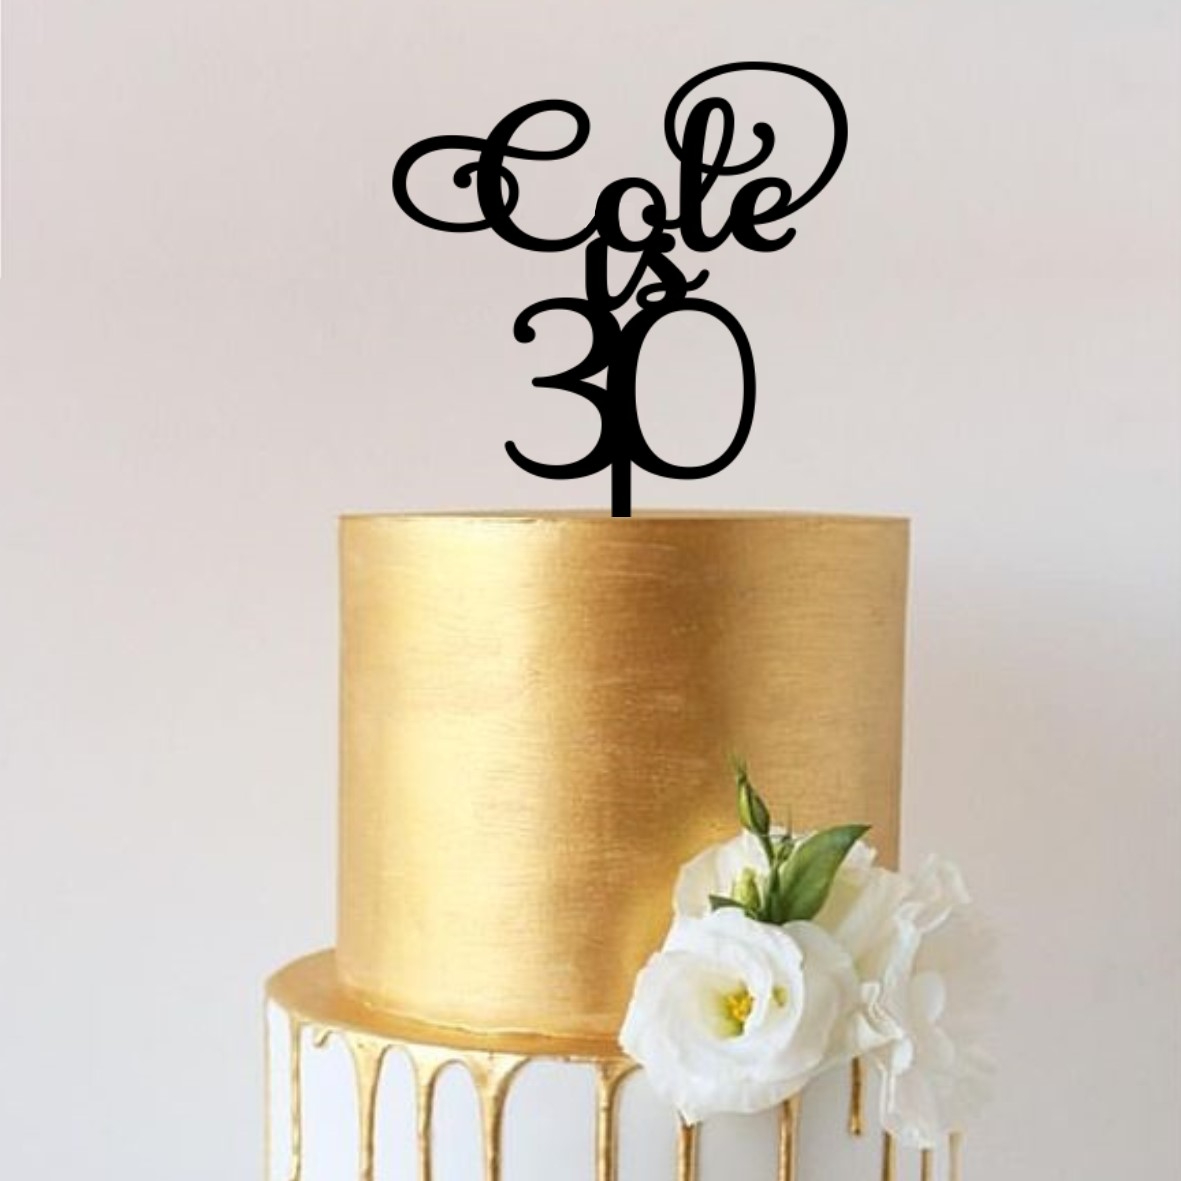 Quick Creations Cake Topper - Cole is Thirty